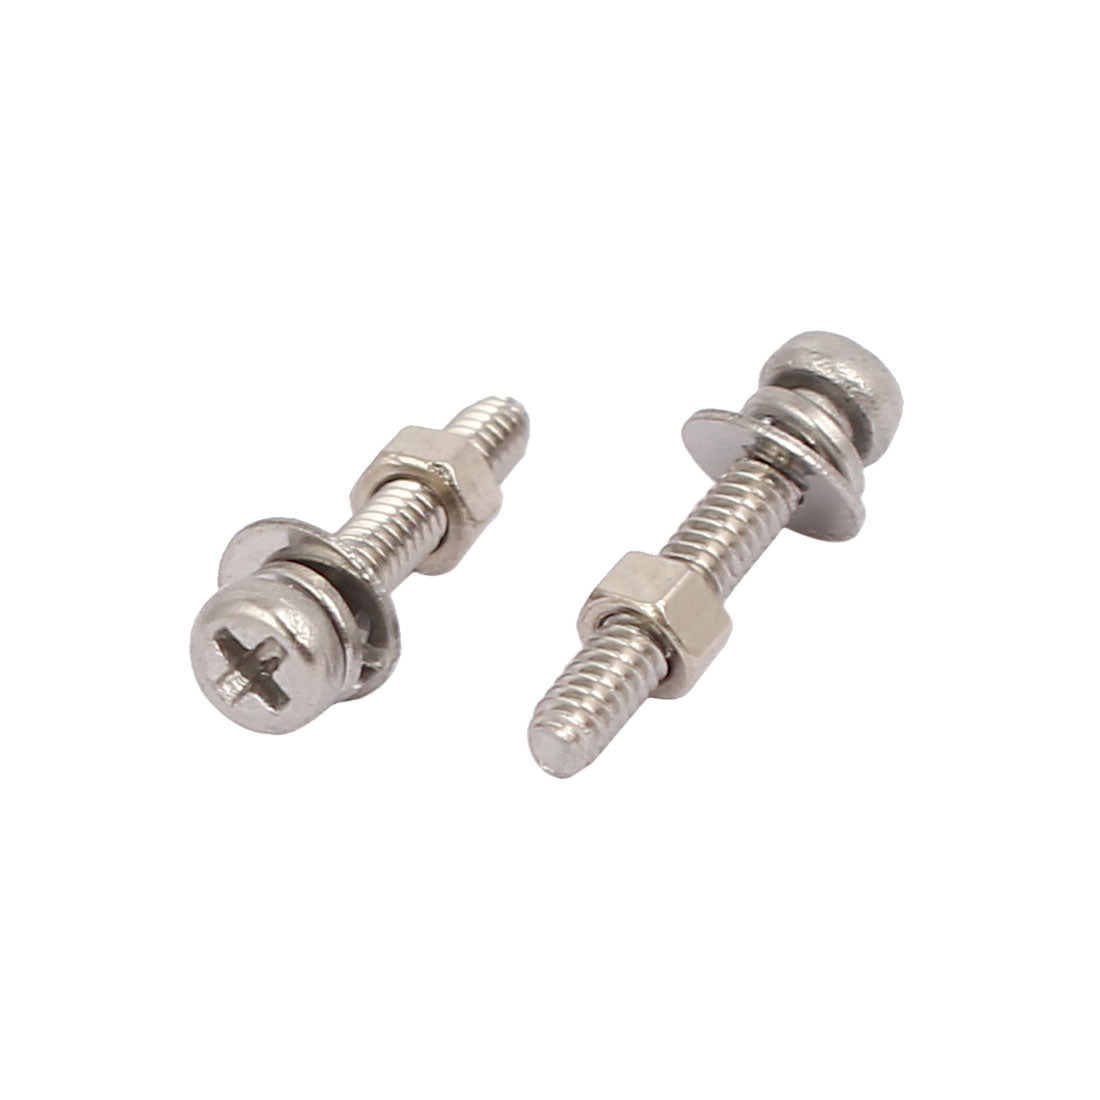 uxcell Uxcell M1.6x10mm 304 Stainless Steel Phillips Pan Head Bolt Screw Nut w Washer 25 Sets